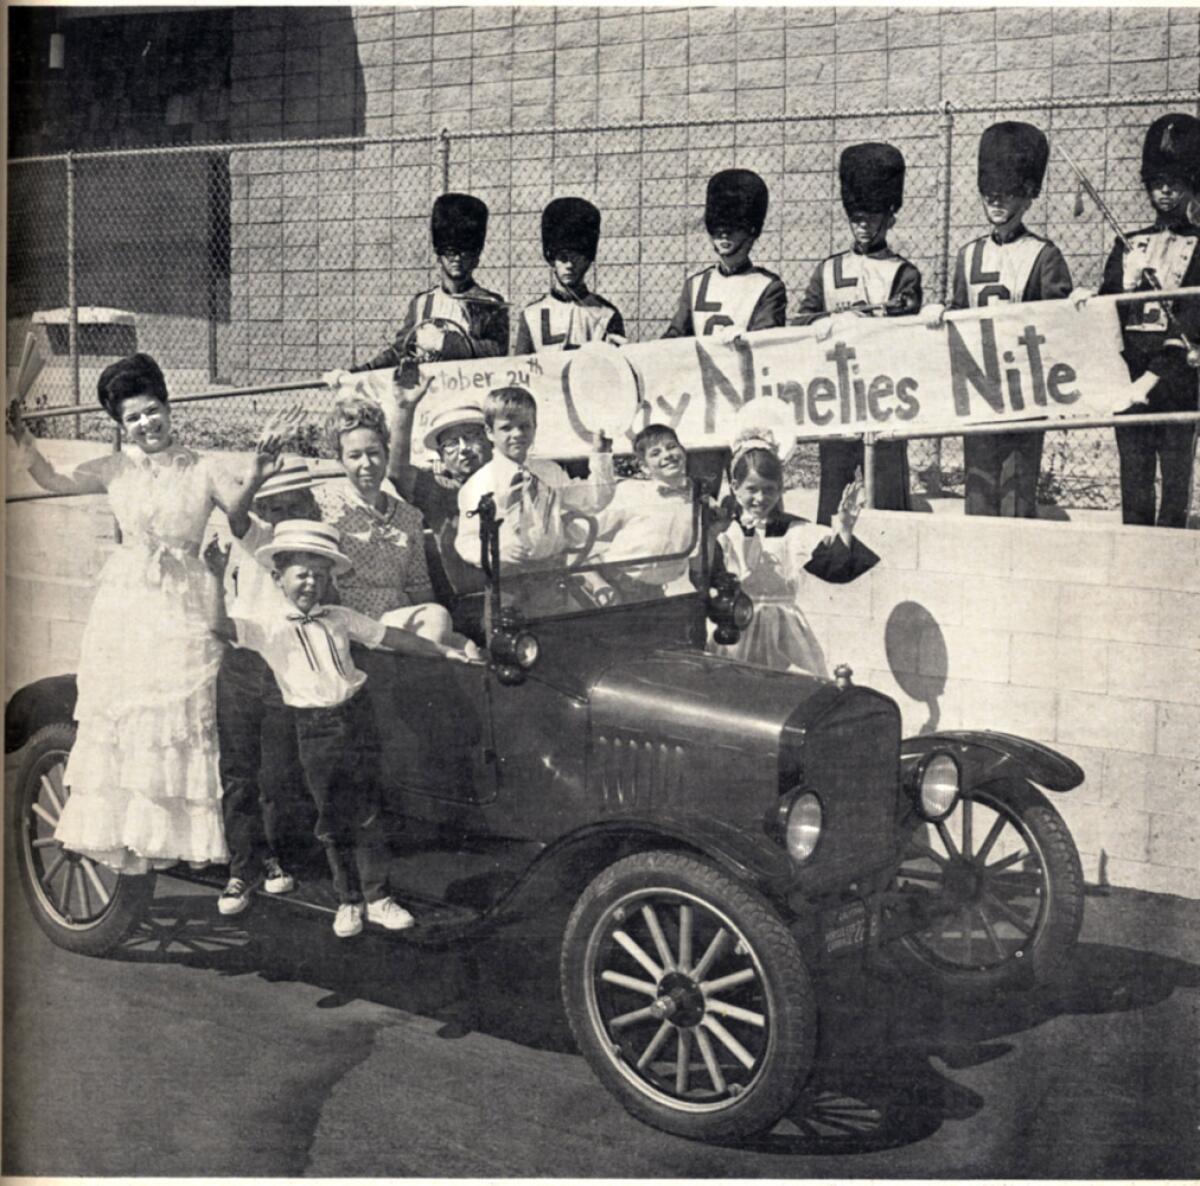 The La Cañada Elementary School PTA carnival in the fall of 1969 carried a theme hearkening back to the school’s early days in the 1890s.